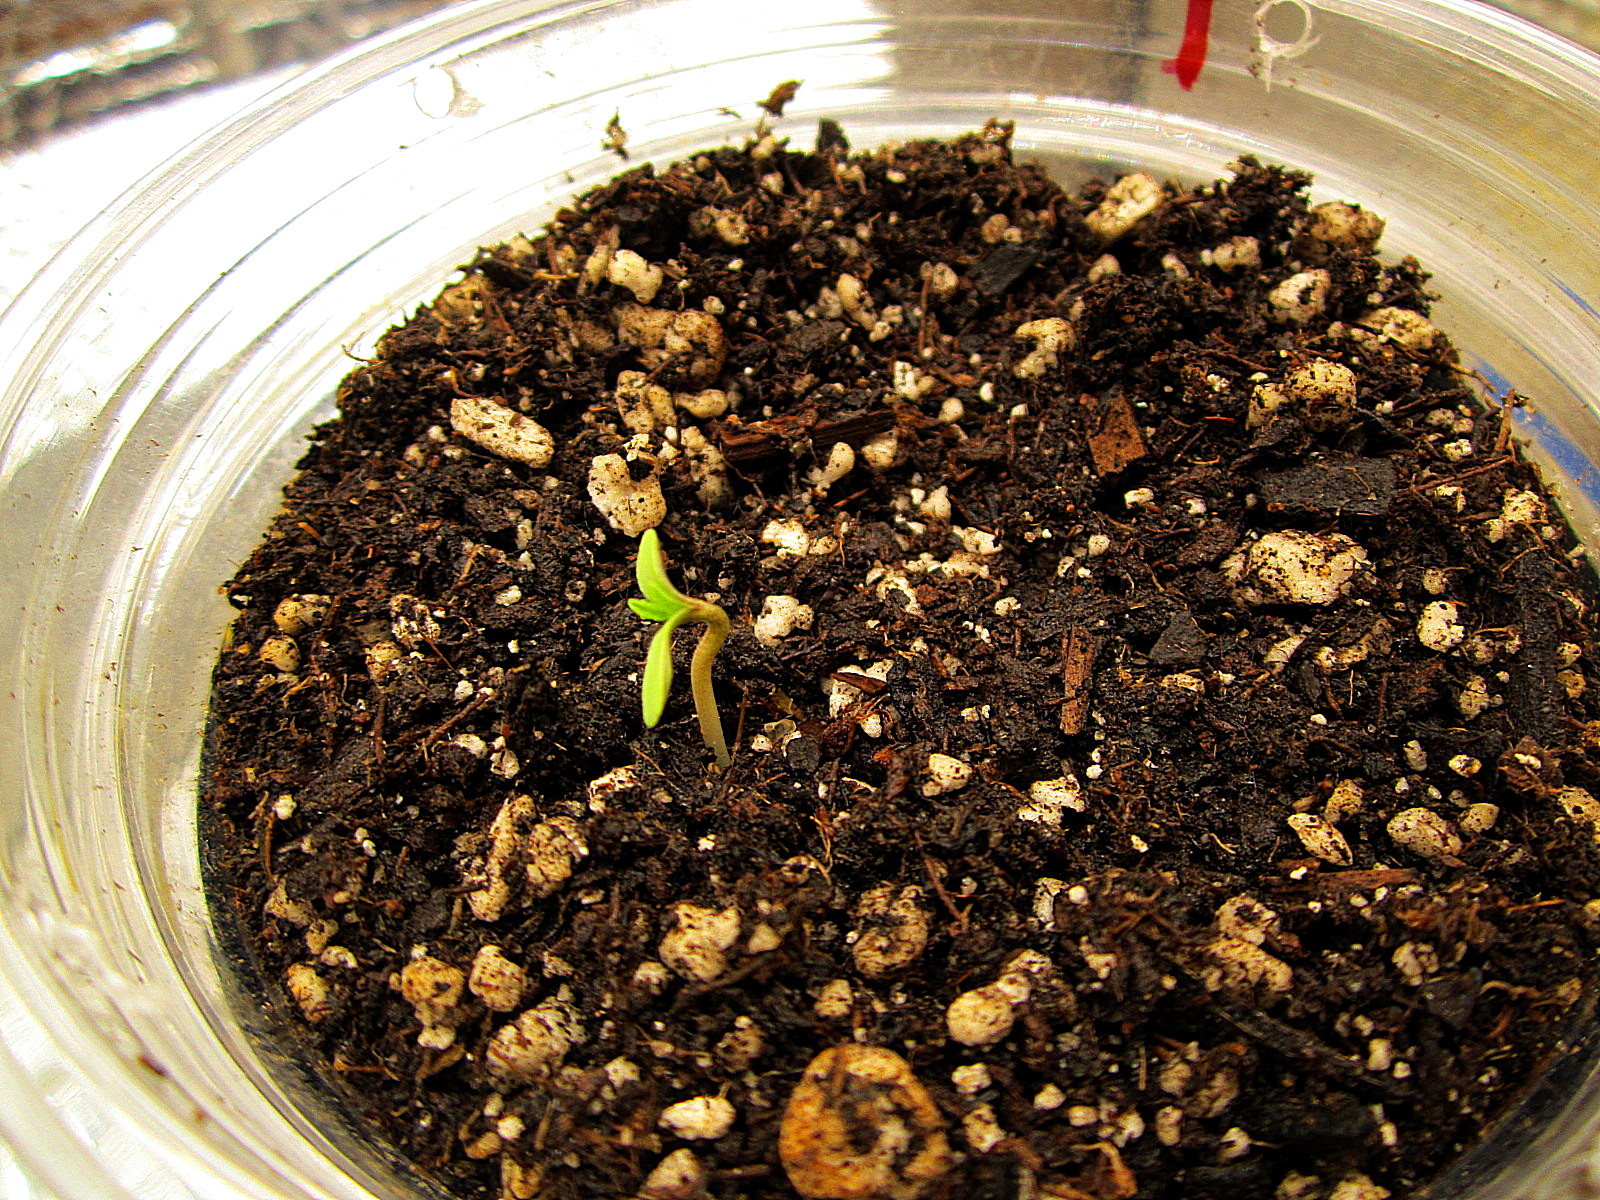 8-GG sprout.jpg